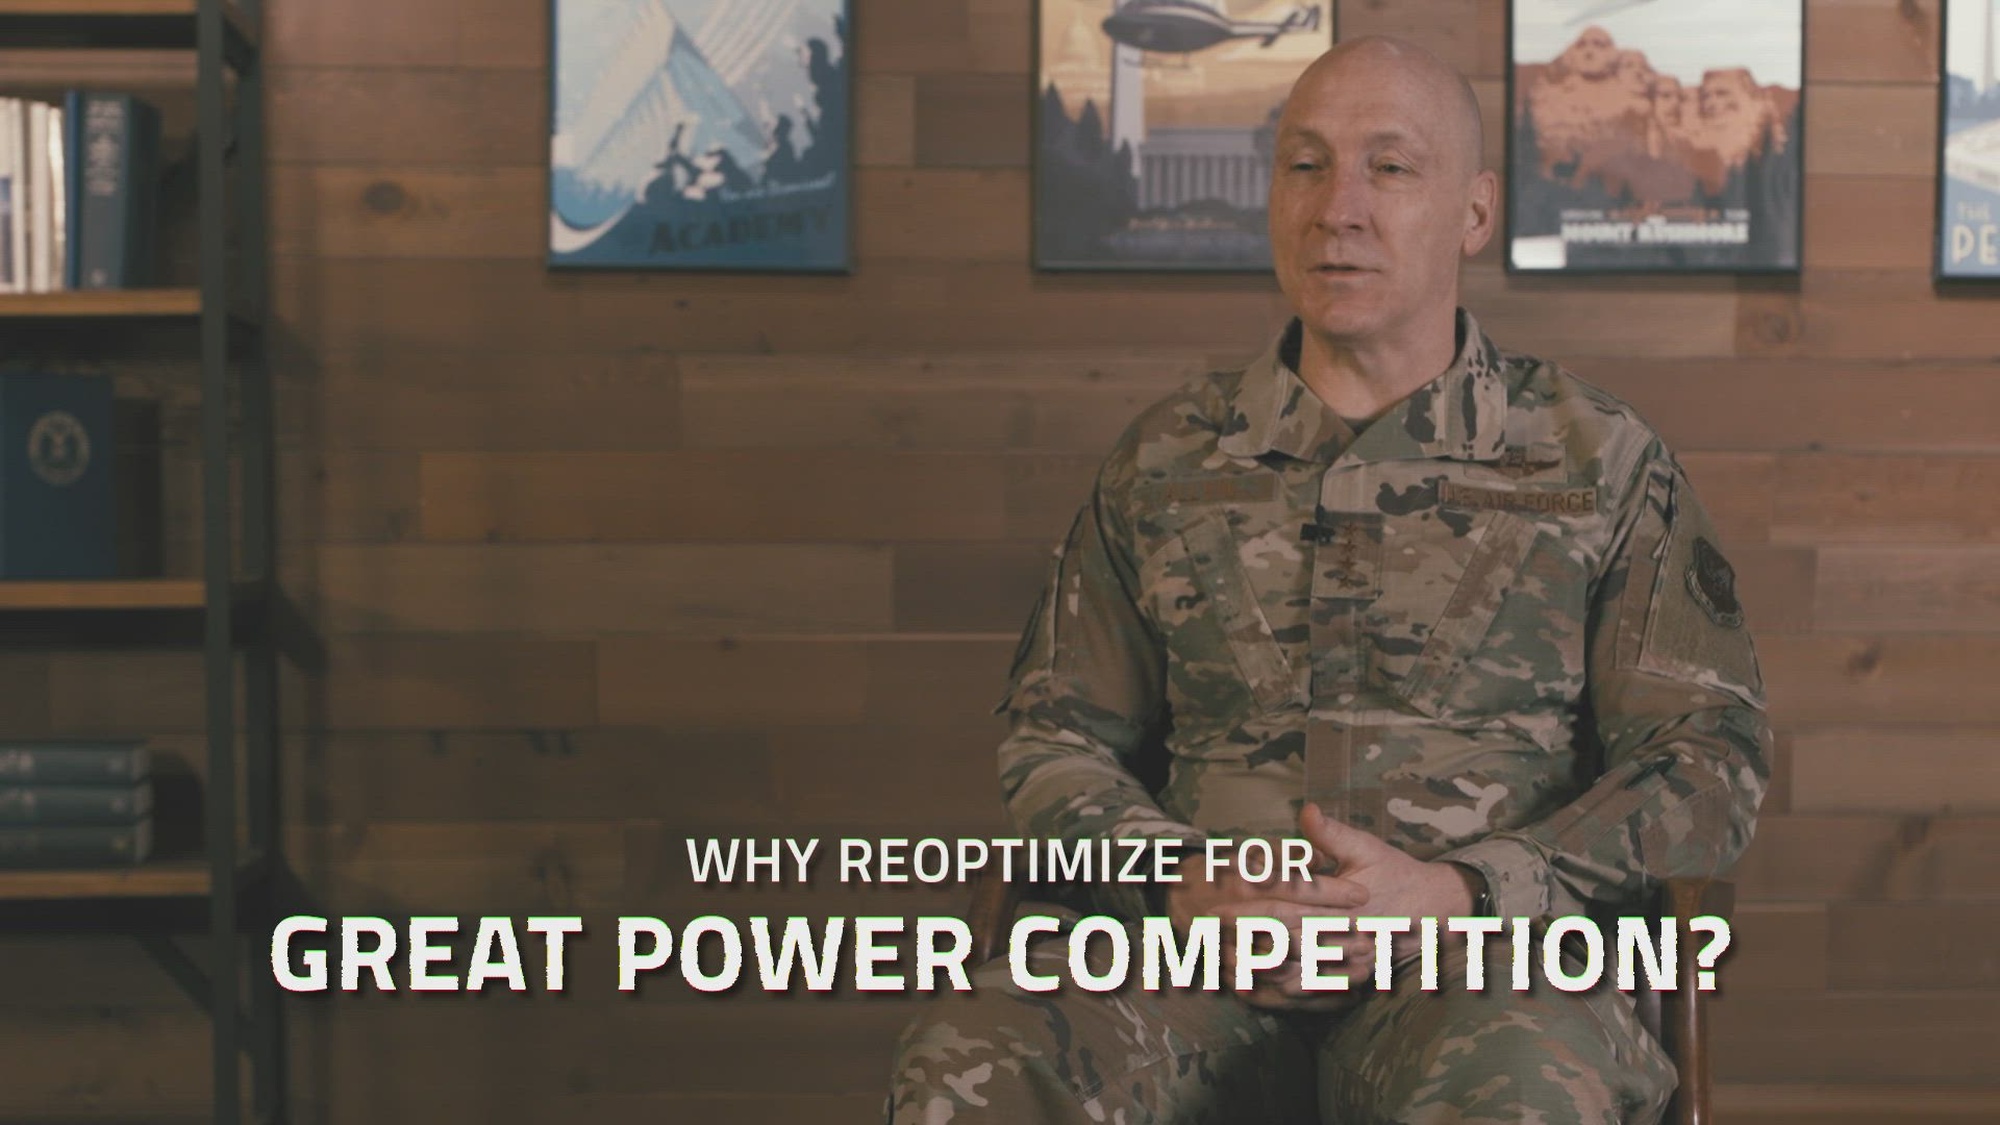 Why reoptimize for GPC? Air Force Chief of Staff Gen. David Allvin explains his perspective on it and the role the Air Force plays in ensuring our nation's military superiority. #reoptimization #DAFGPC